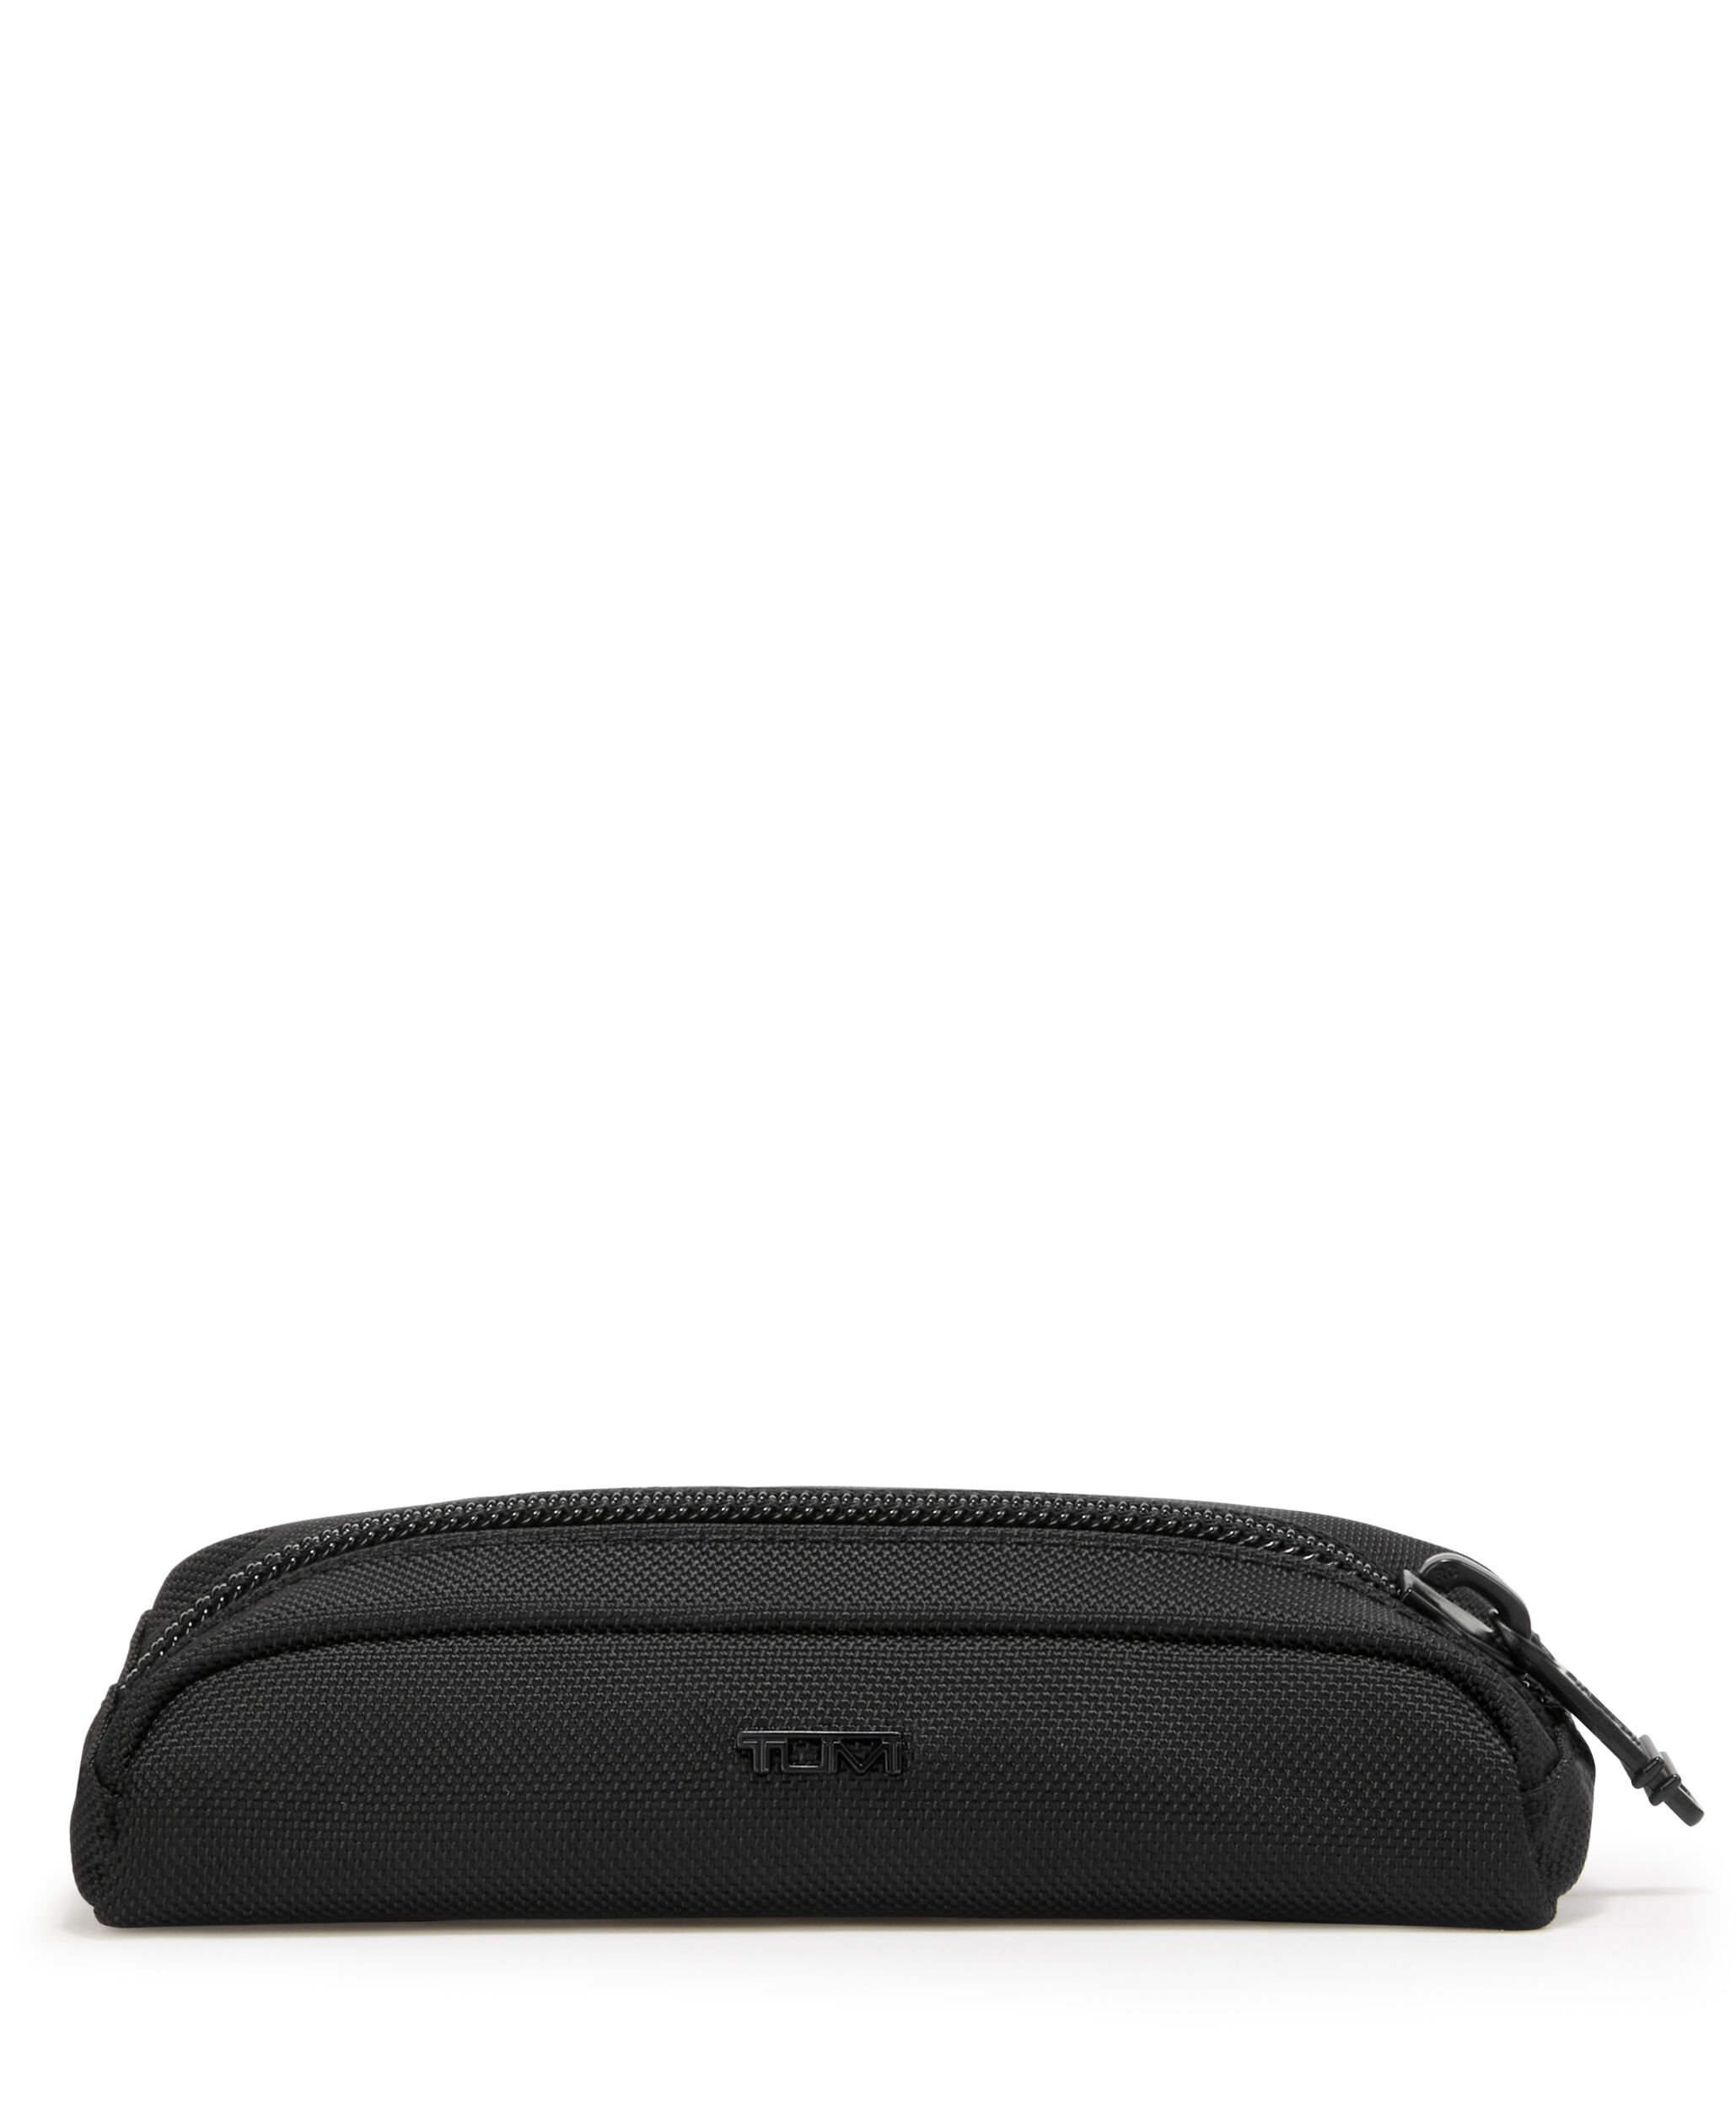 Coin Purse By Tumi Size: Small